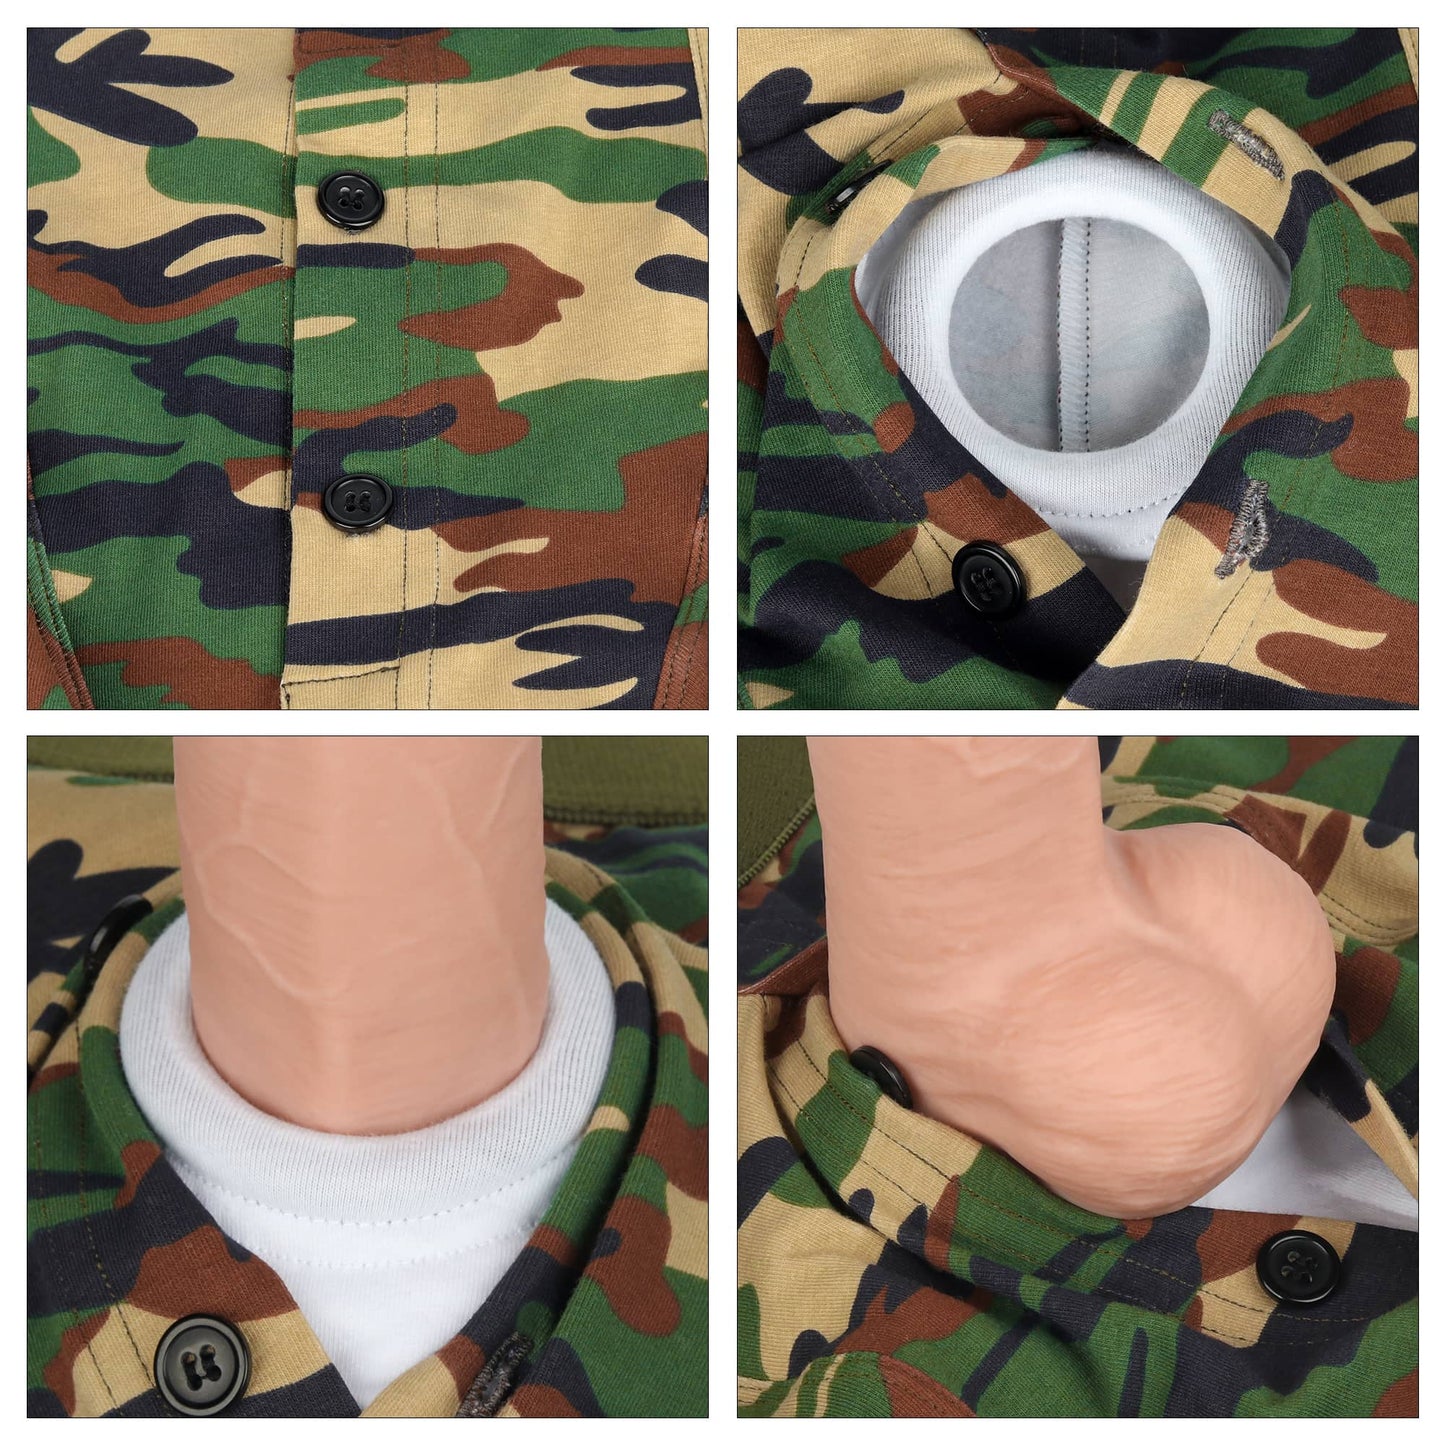 Put the dildo into the O ring of the camo strap on harness shorts